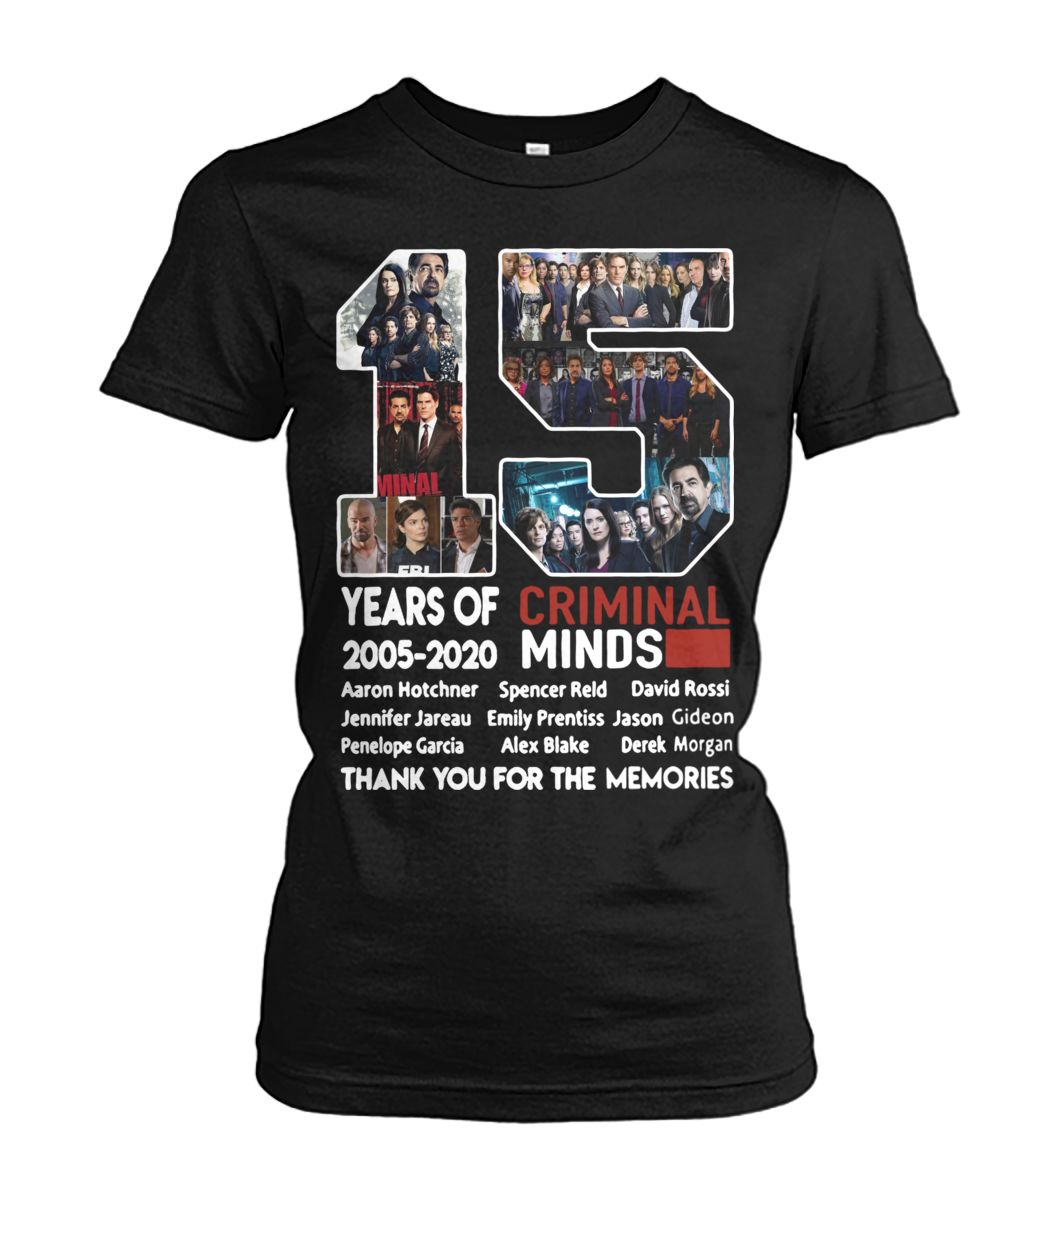 15 years of Criminal Minds 2005 2020 thank you for the memories women's crew tee